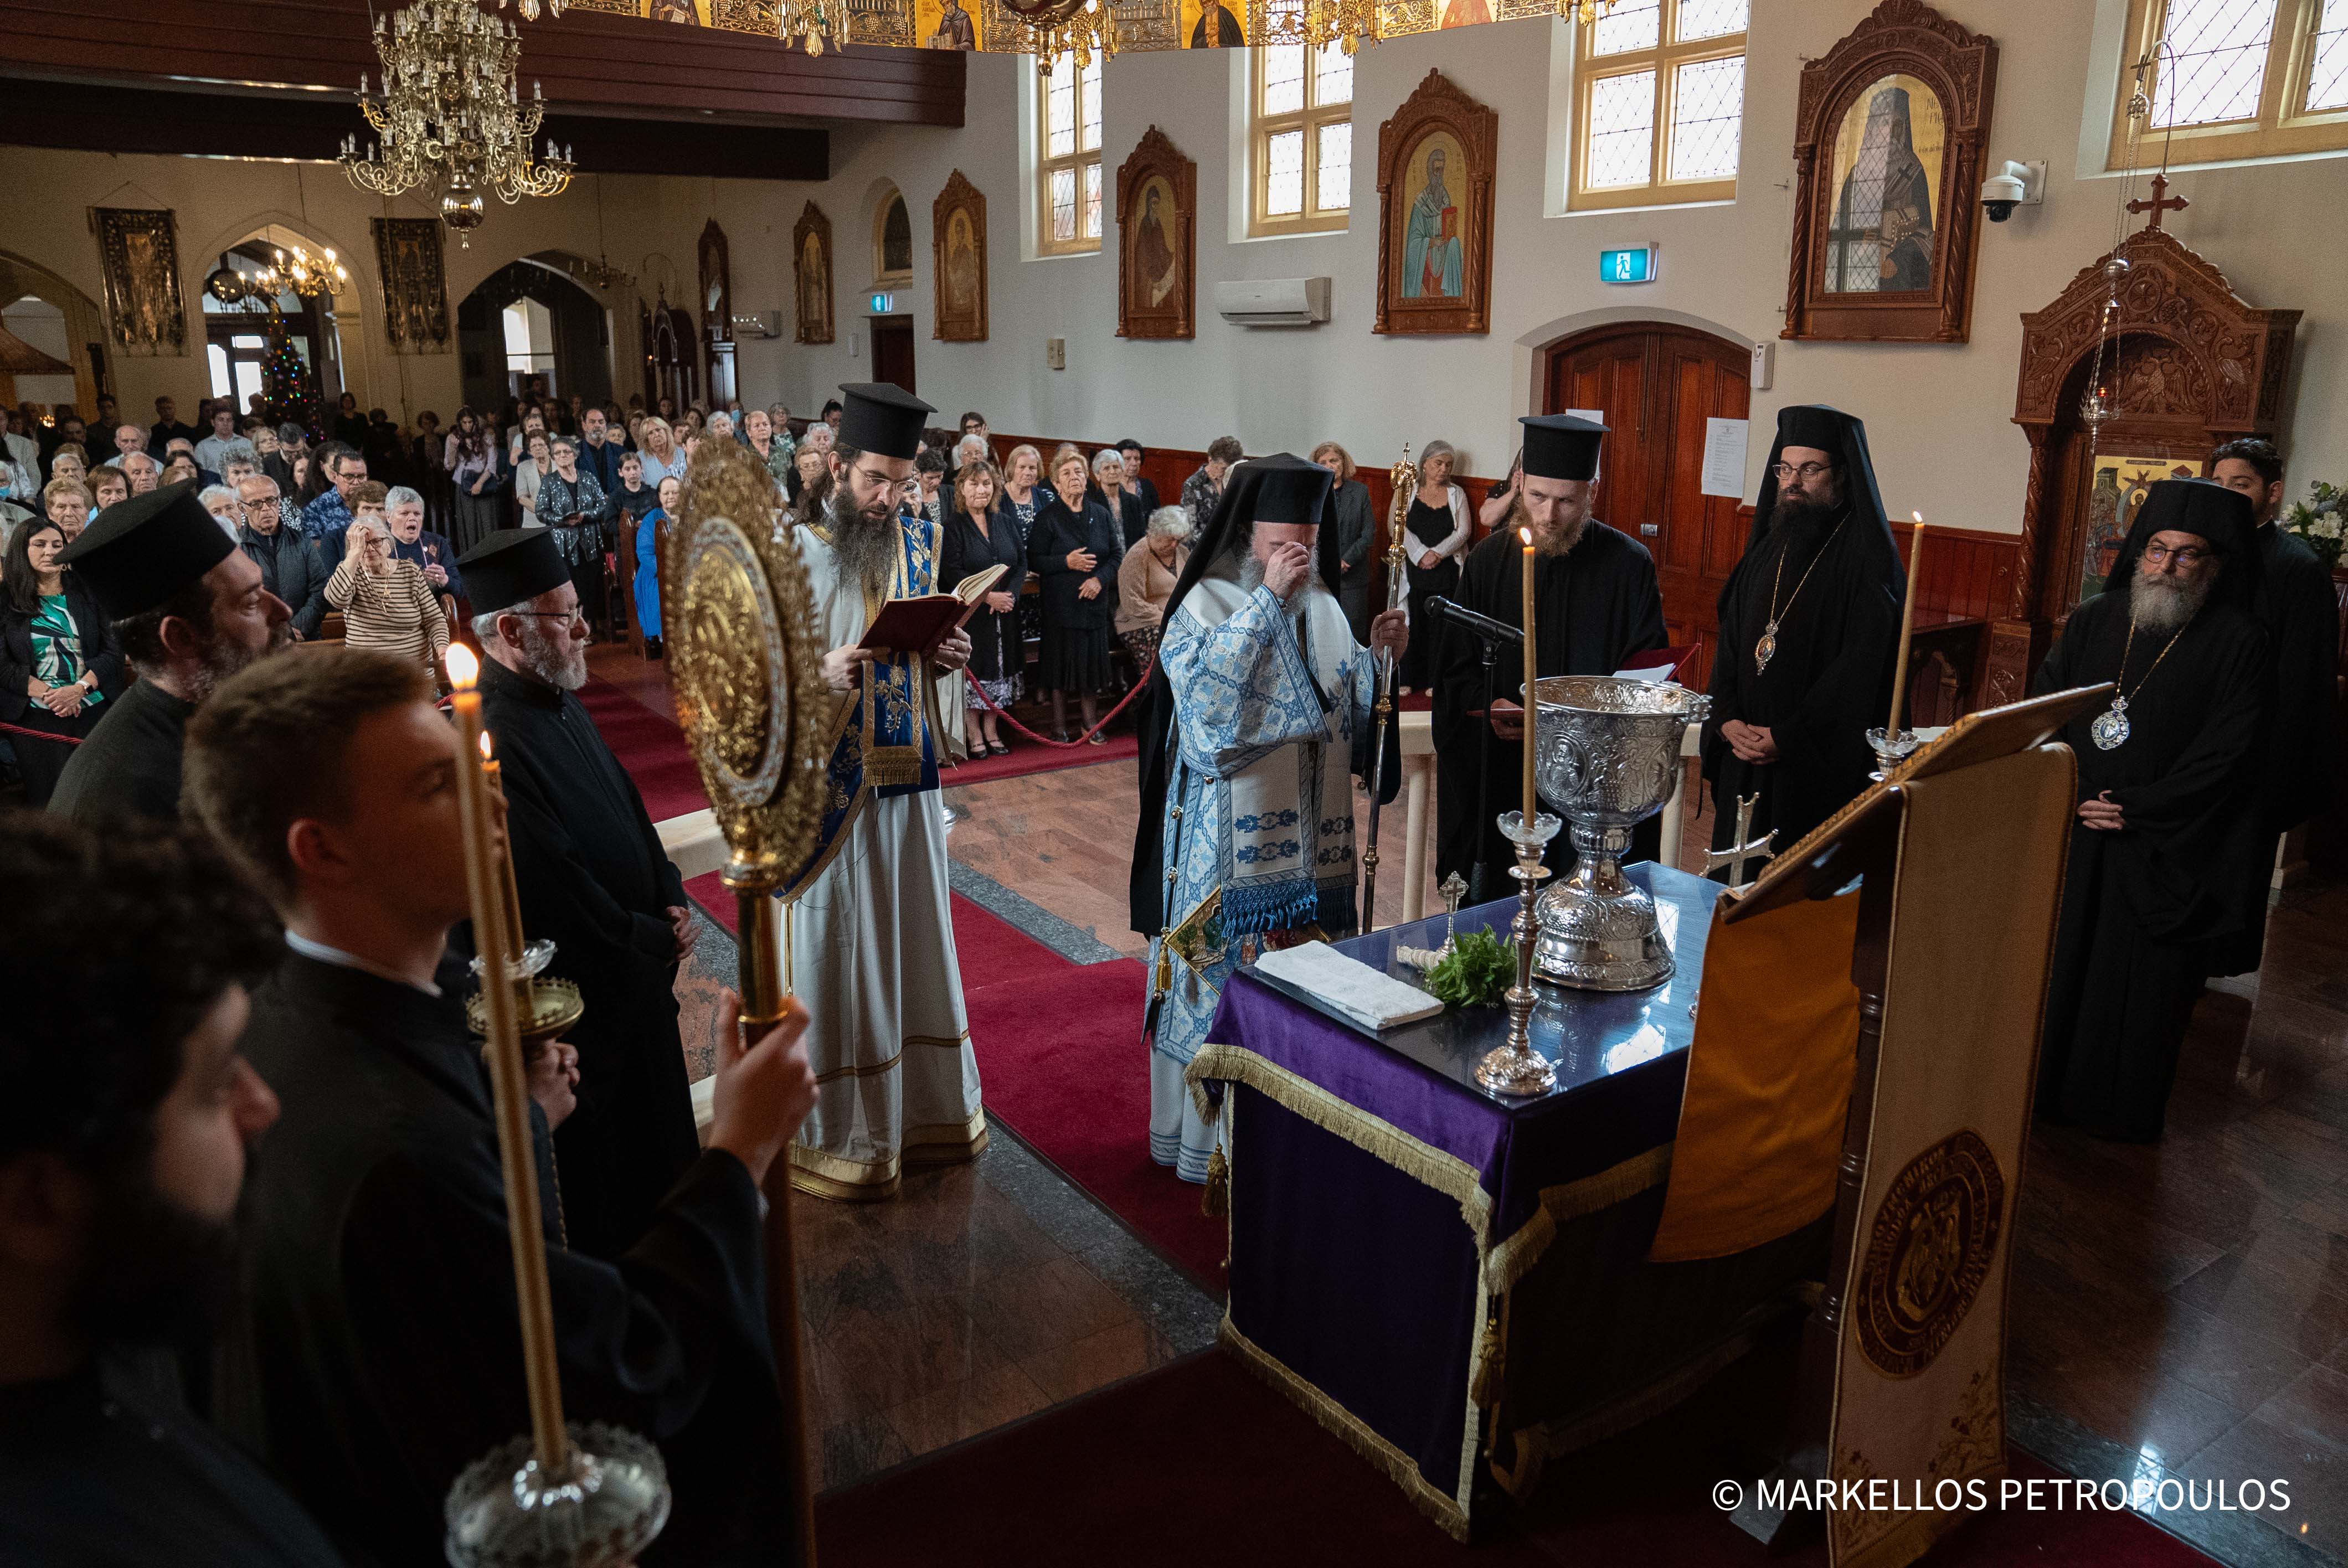 The Eve of the Feast of the Epiphany at the Holy Monastery of ‘Axion Esti’ in Northcote